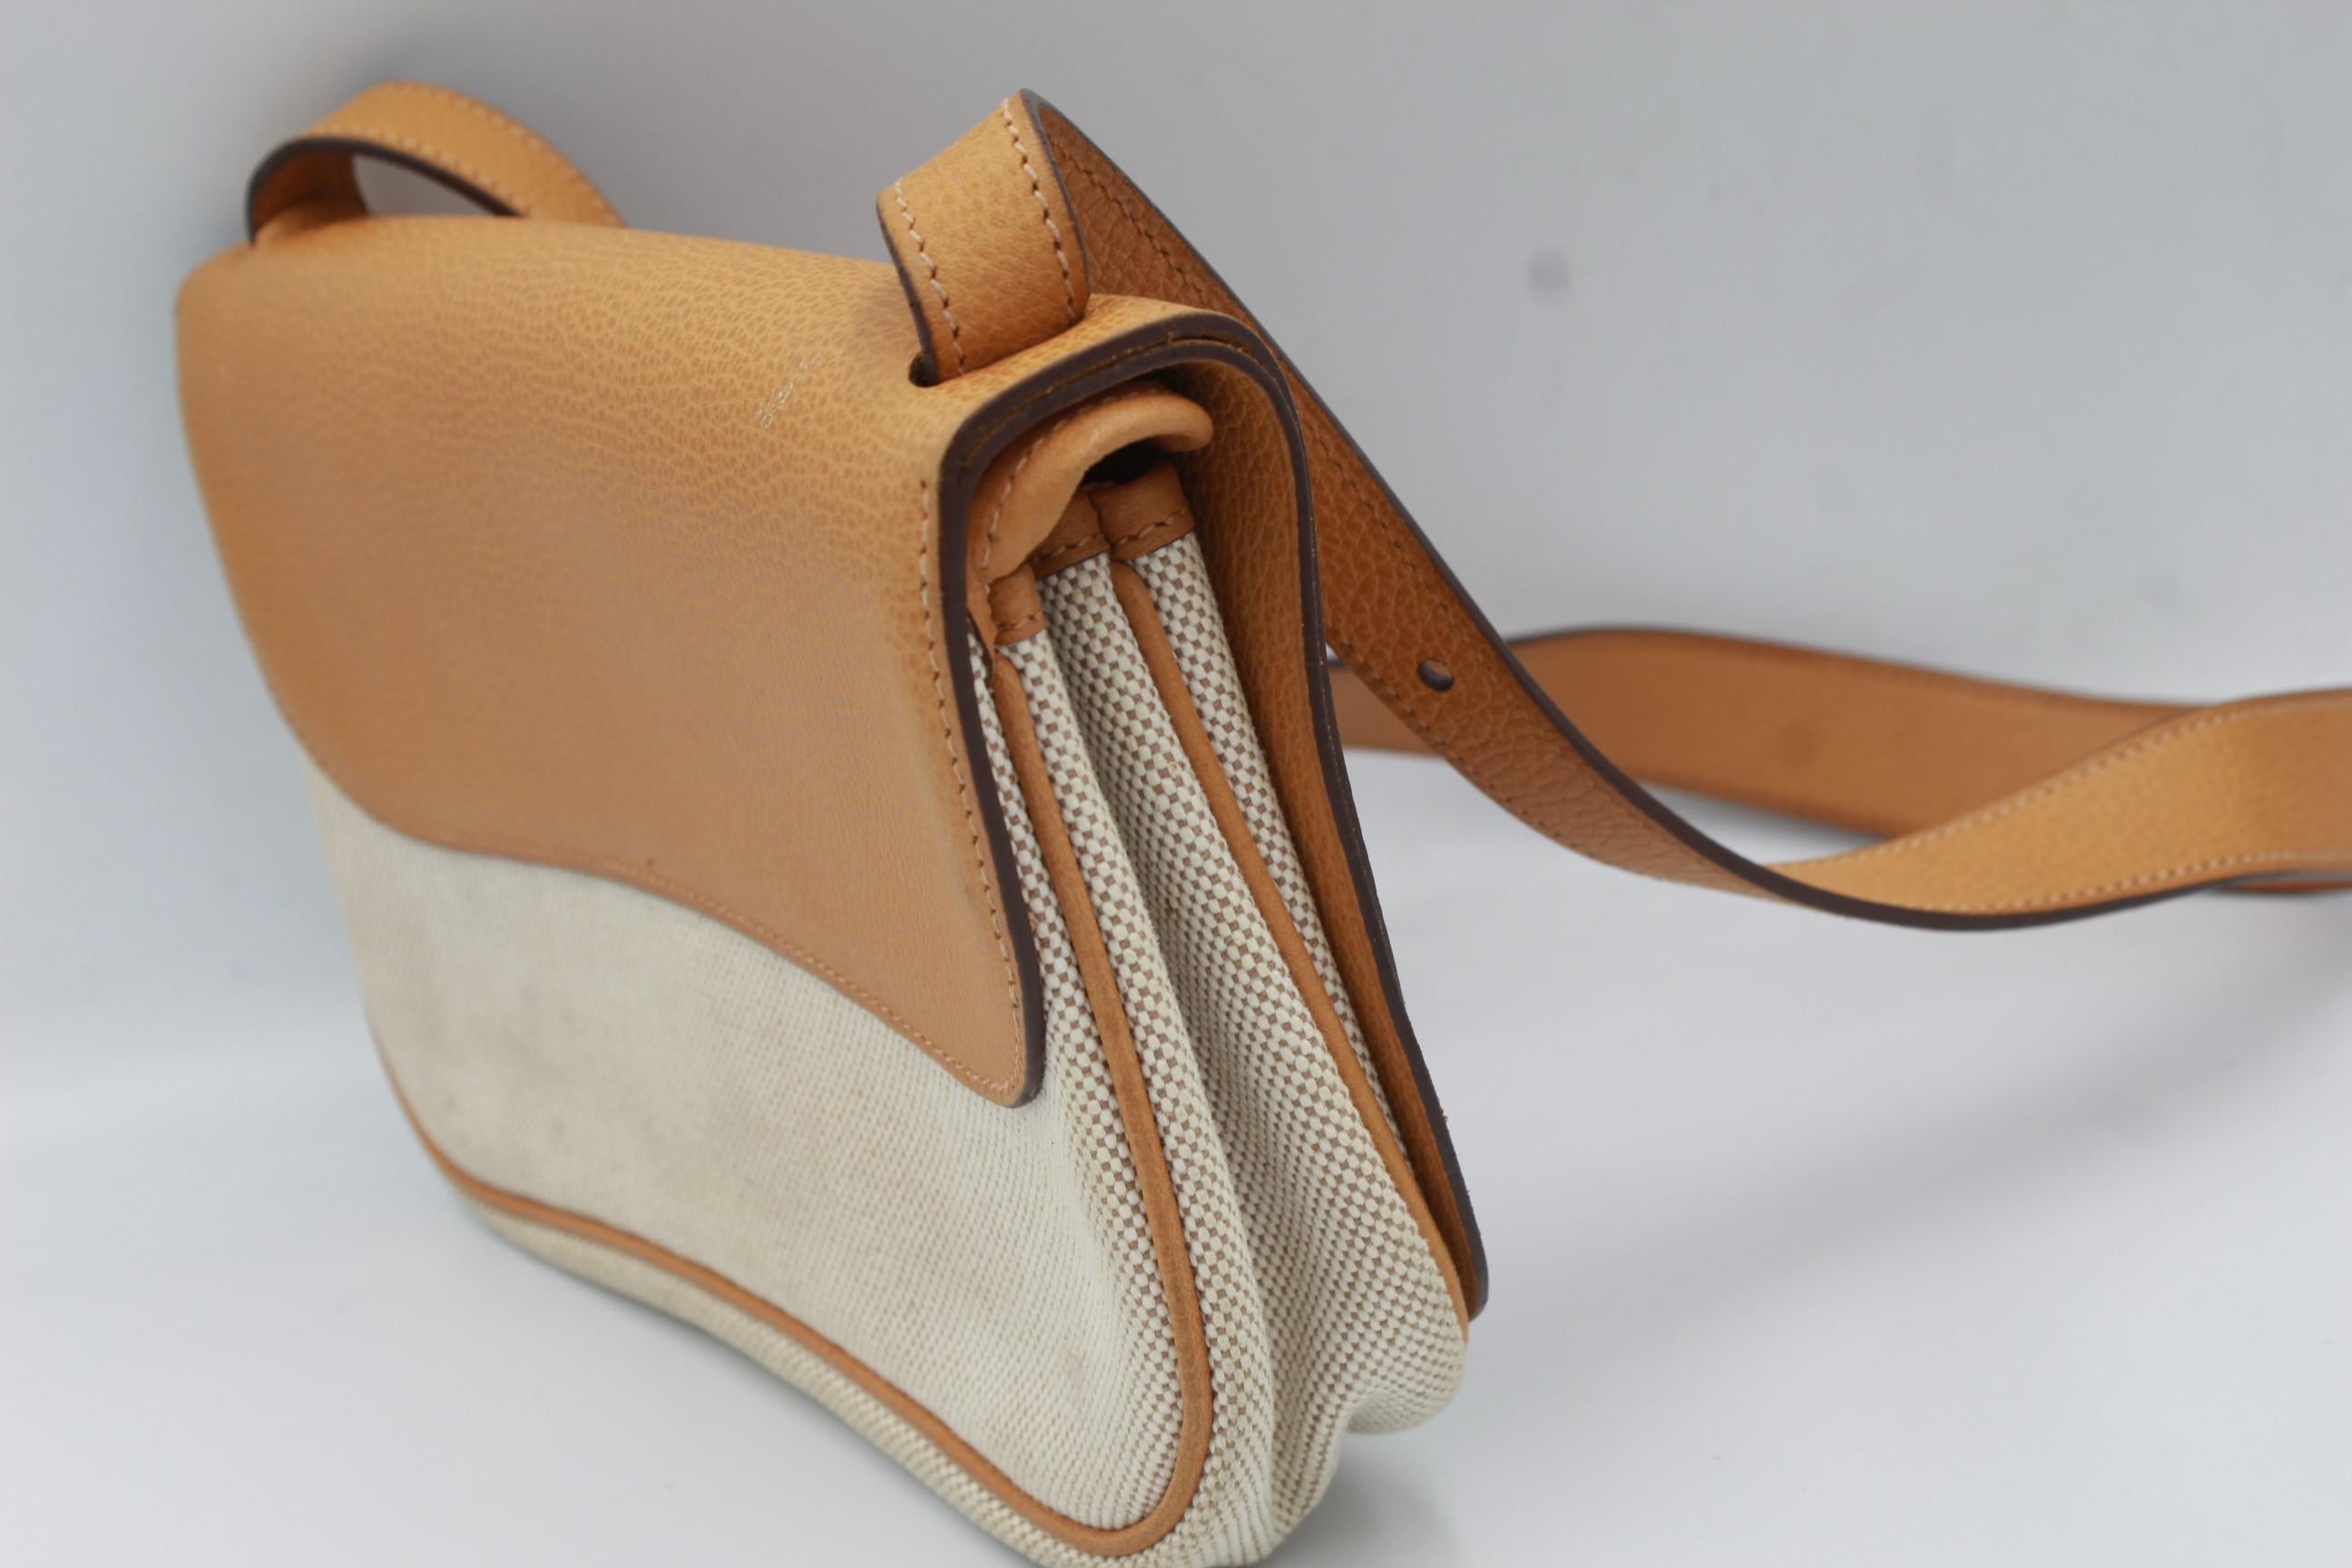 Hermès Colorado bag in canvas and leather.
Good condition, with some signs of wear ( on the strap, and some stains ).
Shoulder strap.
14cm x 23cm x 5cm